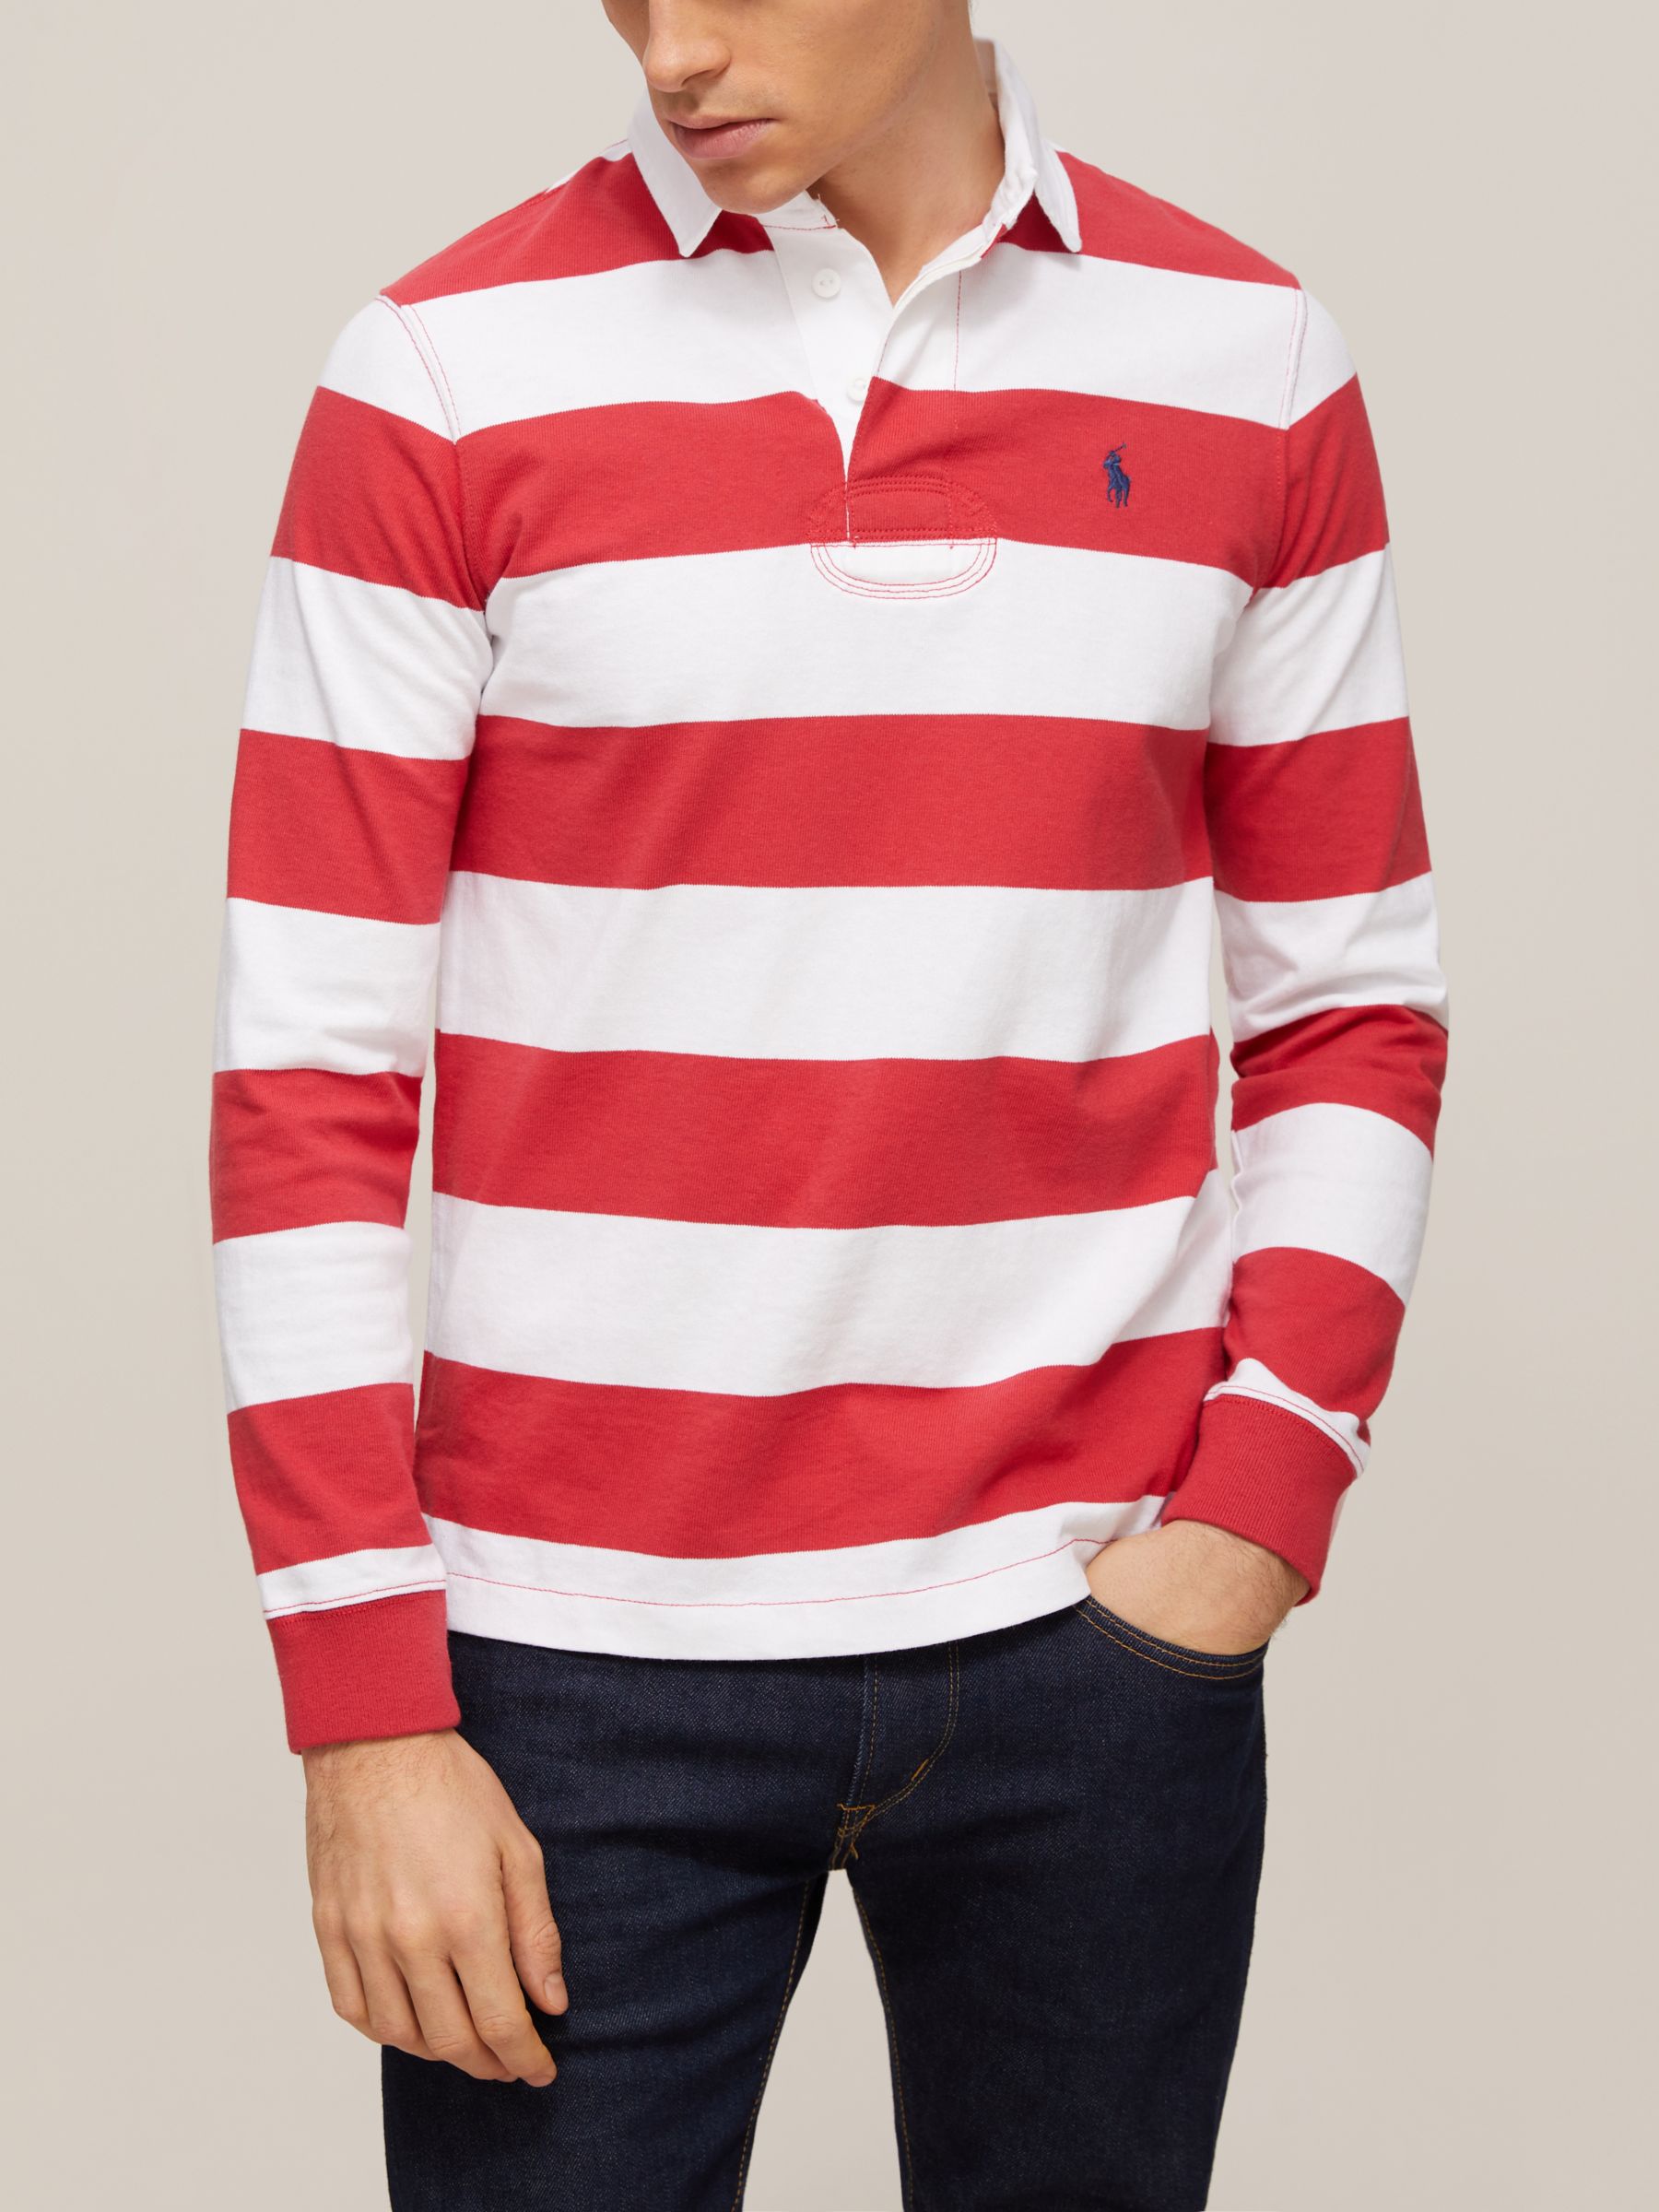 Polo Ralph Lauren Stripe Rugby, Red Stripe Rugby Shirt